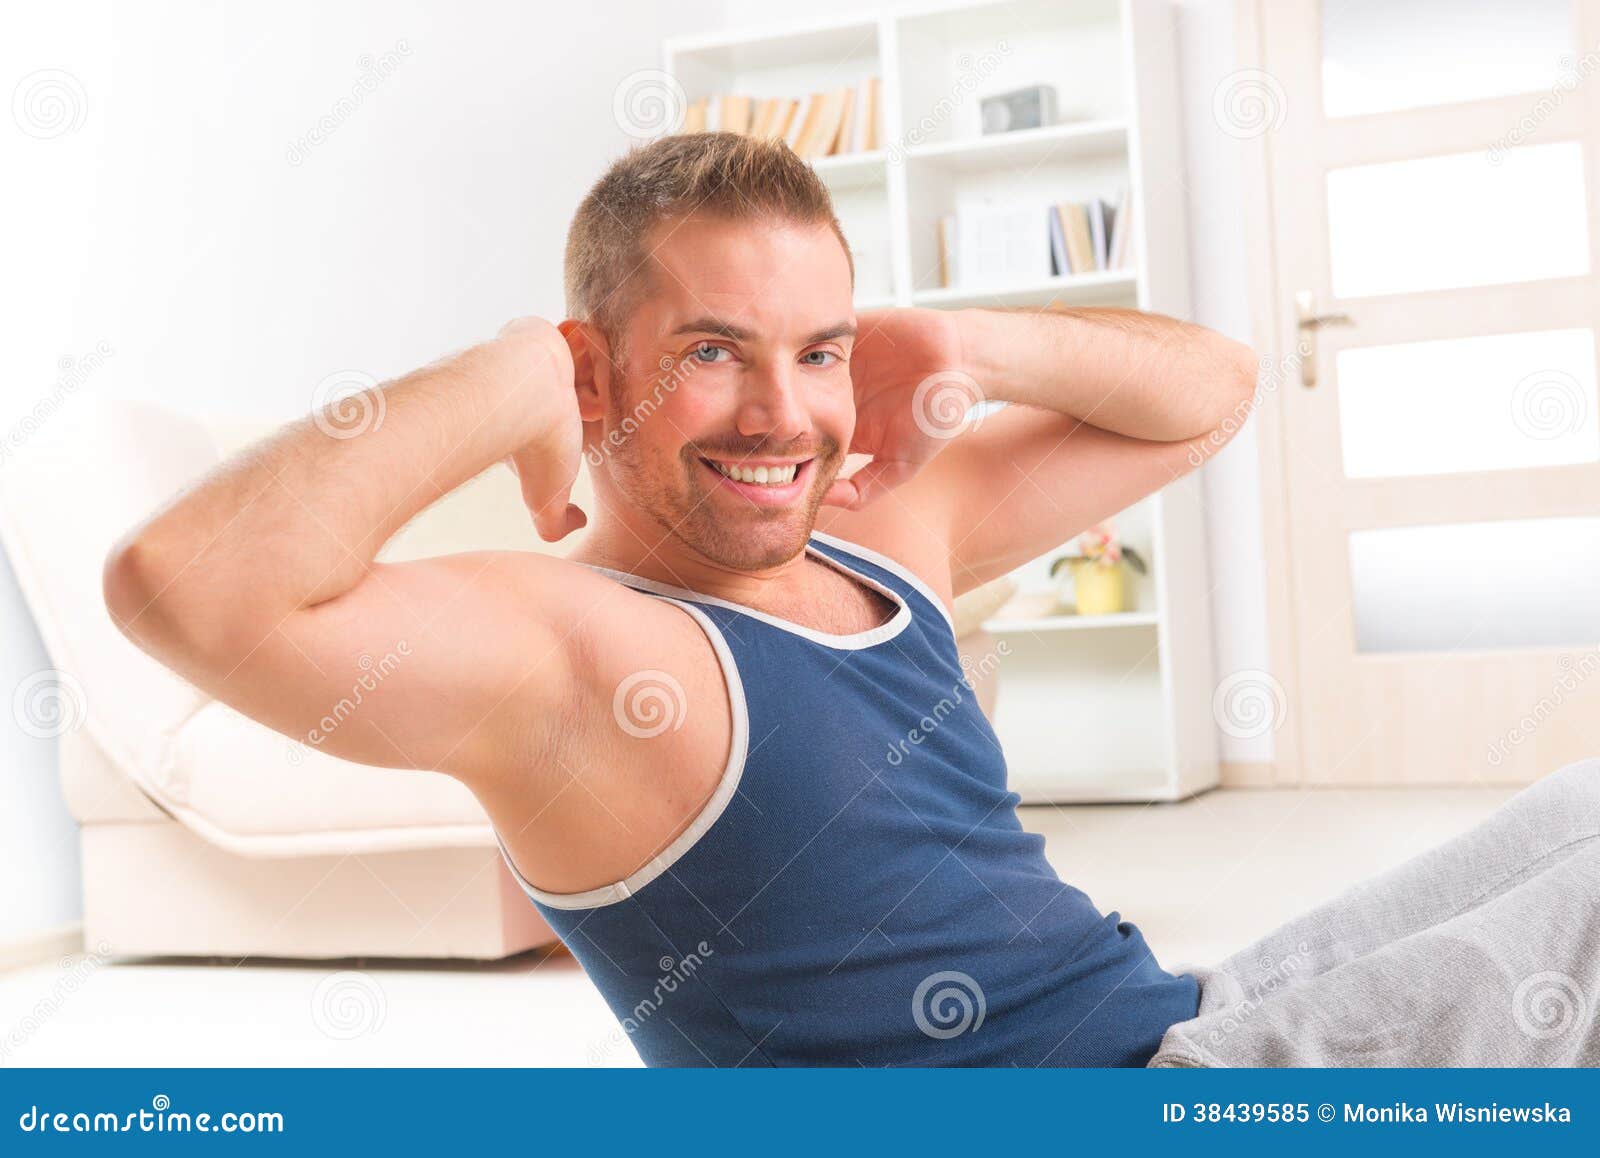 Handsome man doing sit ups stock image. Image of health - 38439585